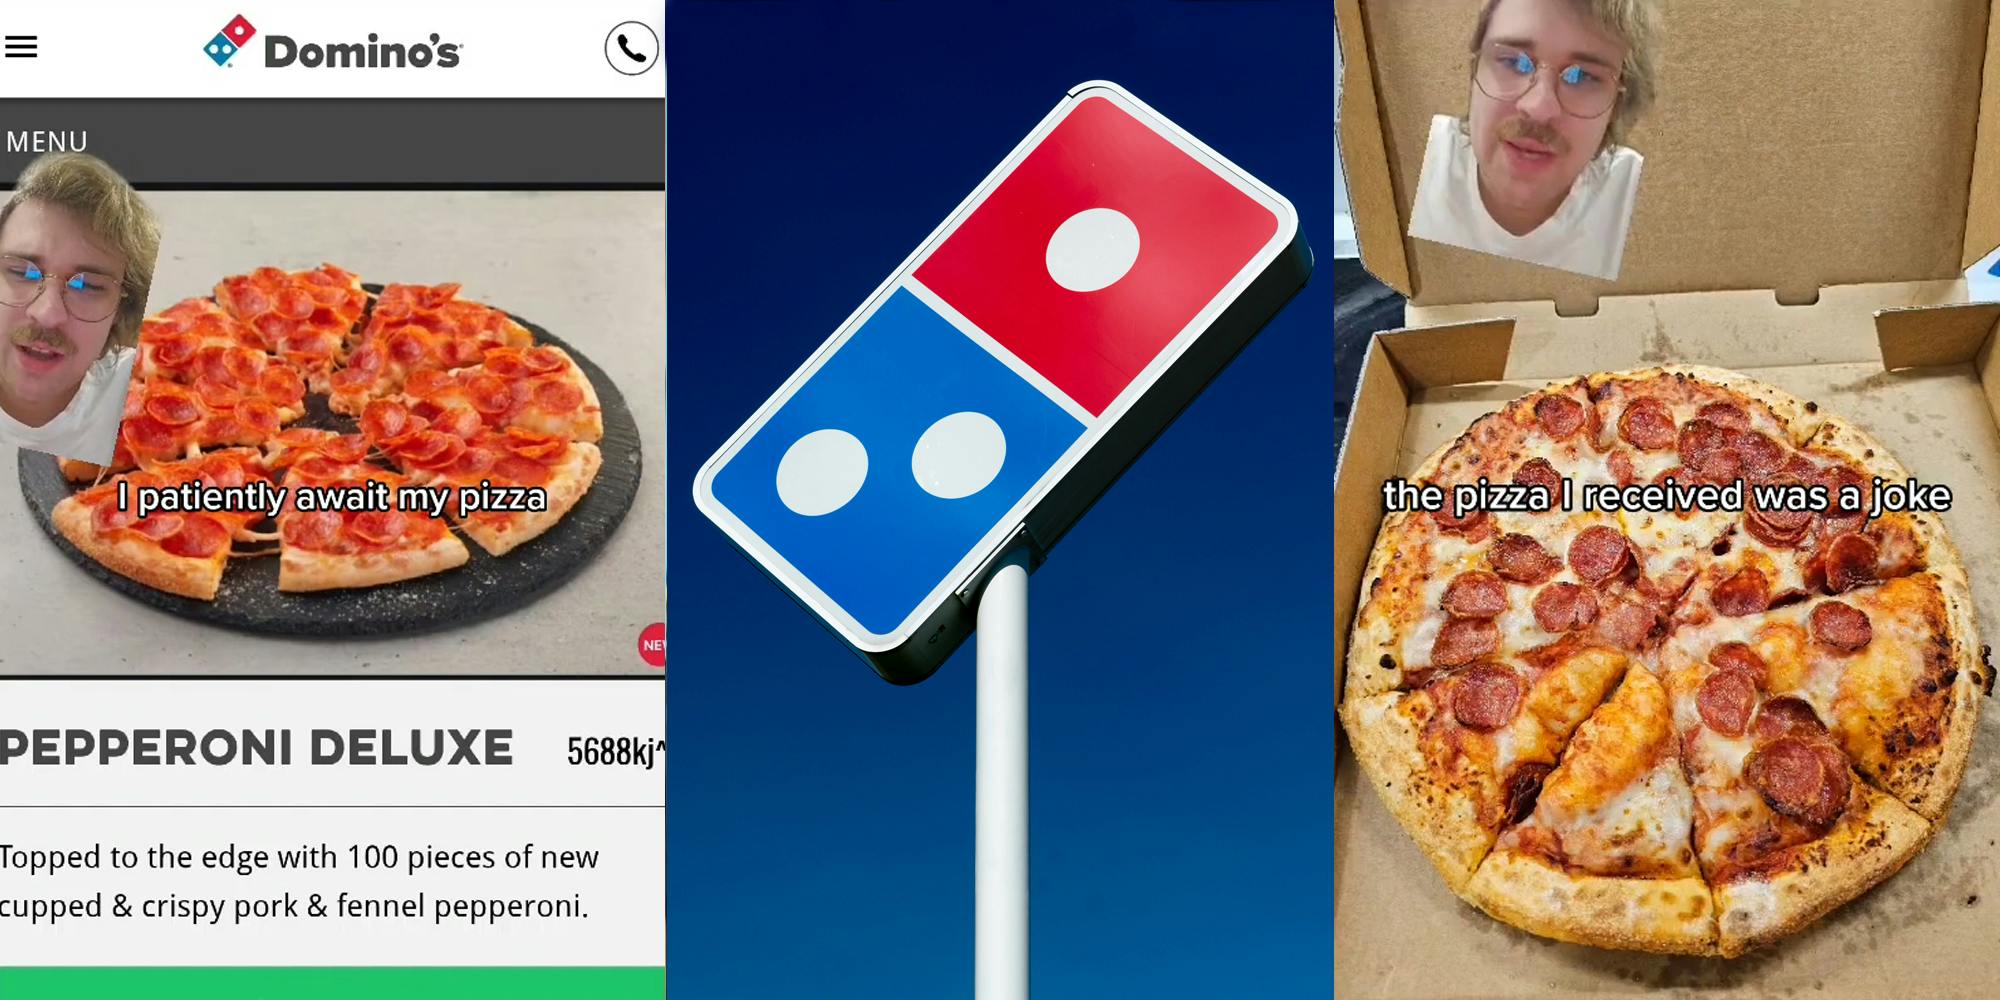 person greenscreen TikTok over Domino's app offer for Pepperoni Deluxe pizza with caption "I patiently await my pizza" (l) Domino's sign with blue sky (c) person greenscreen TikTok over image of Domino's pizza with caption "the pizza I received was a joke" (r)